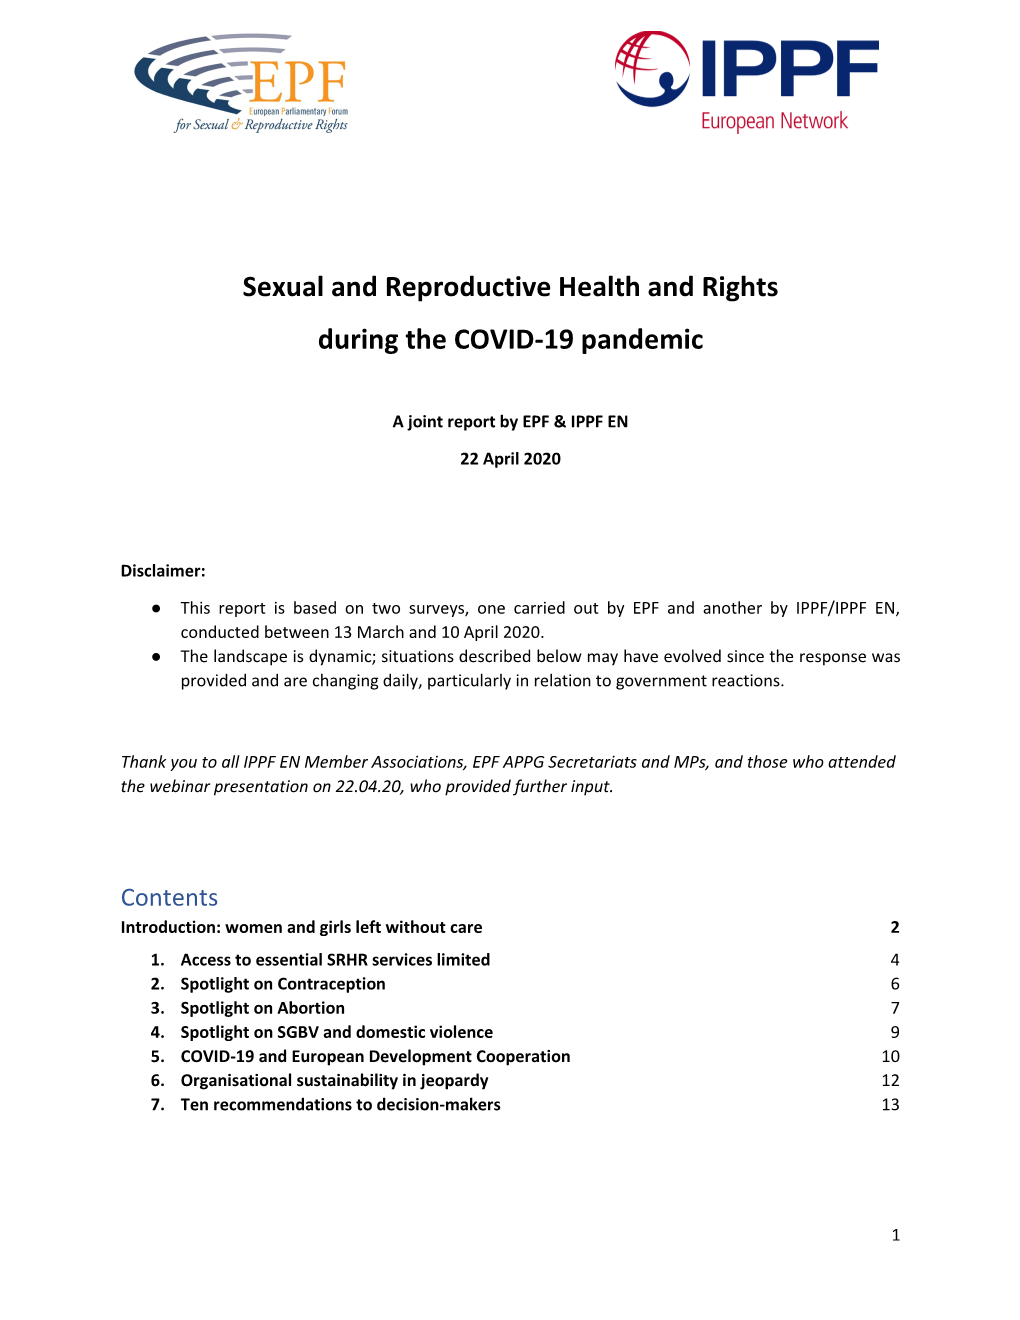 Sexual and Reproductive Health and Rights During the COVID-19